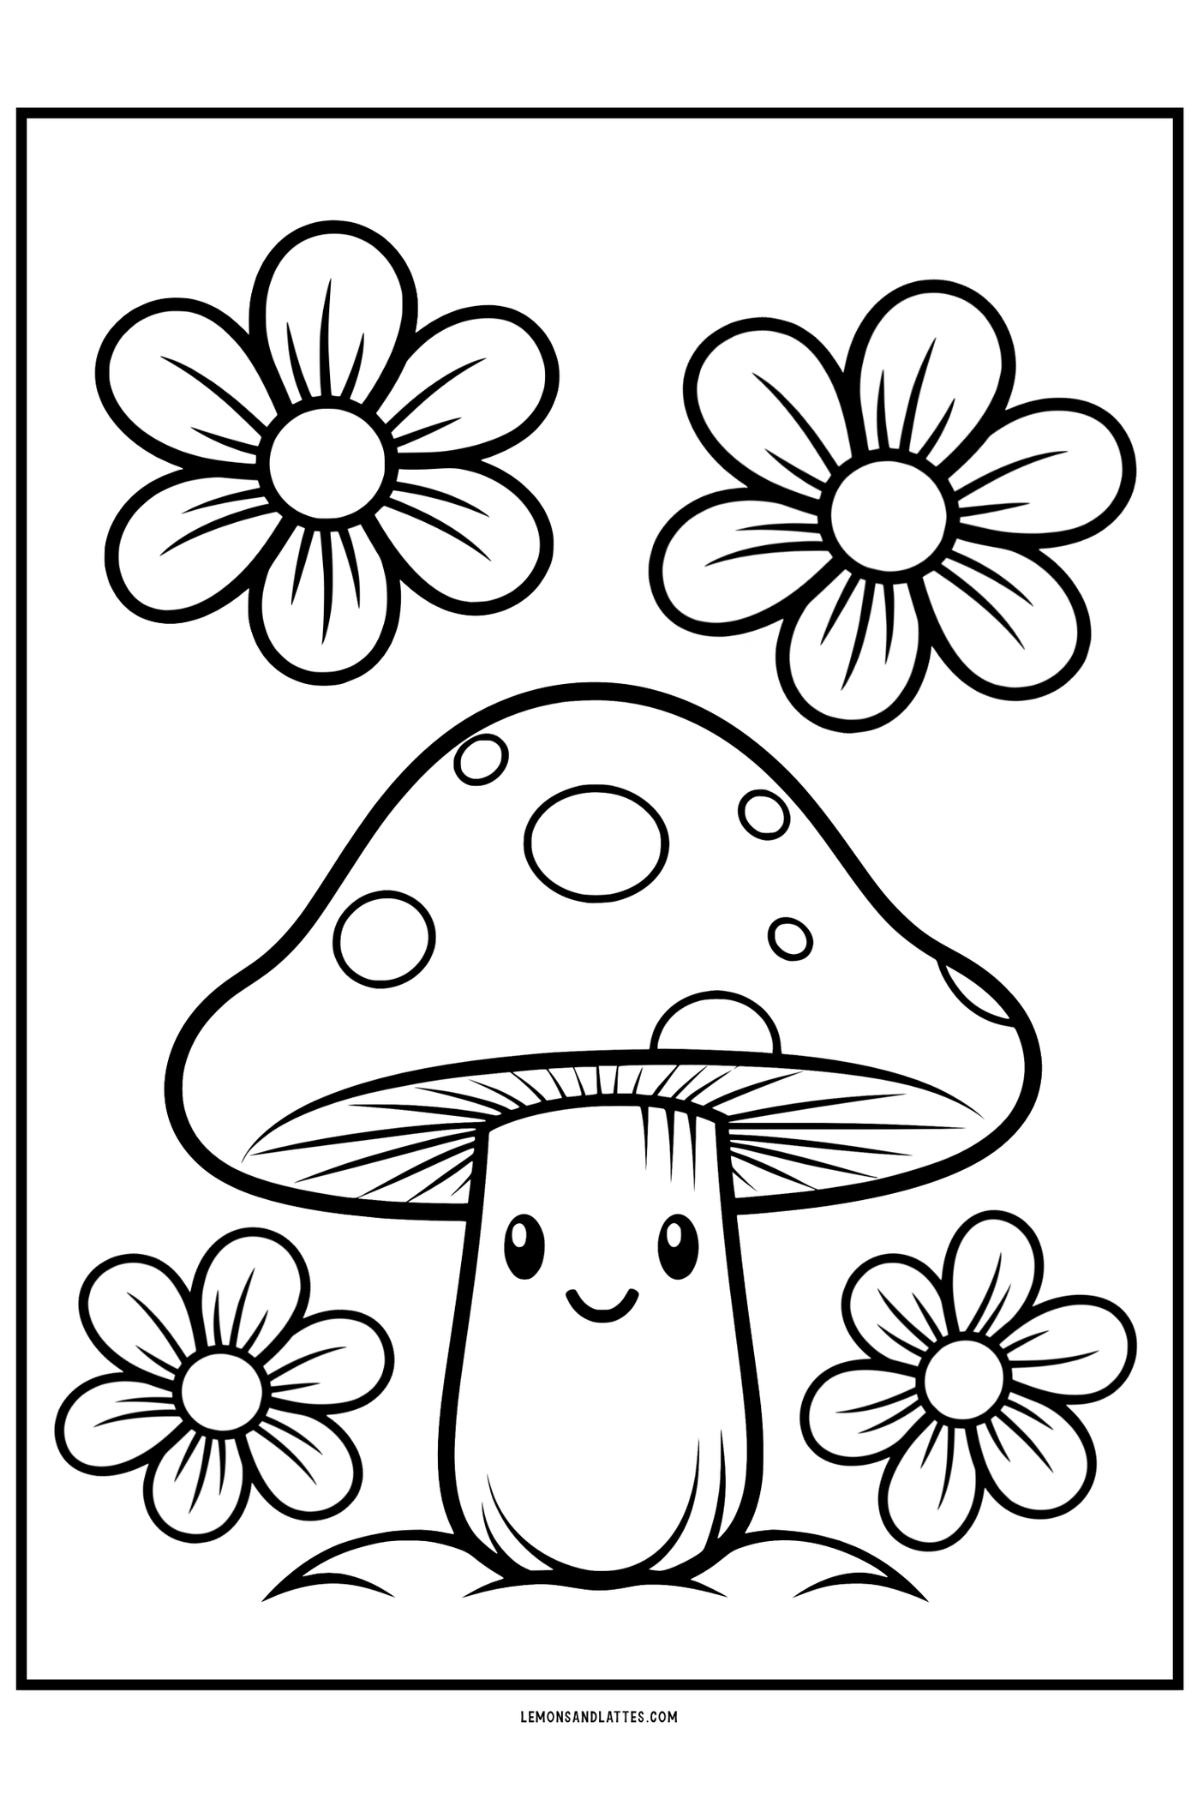 Cute Free Mushroom Coloring Page with Flowers